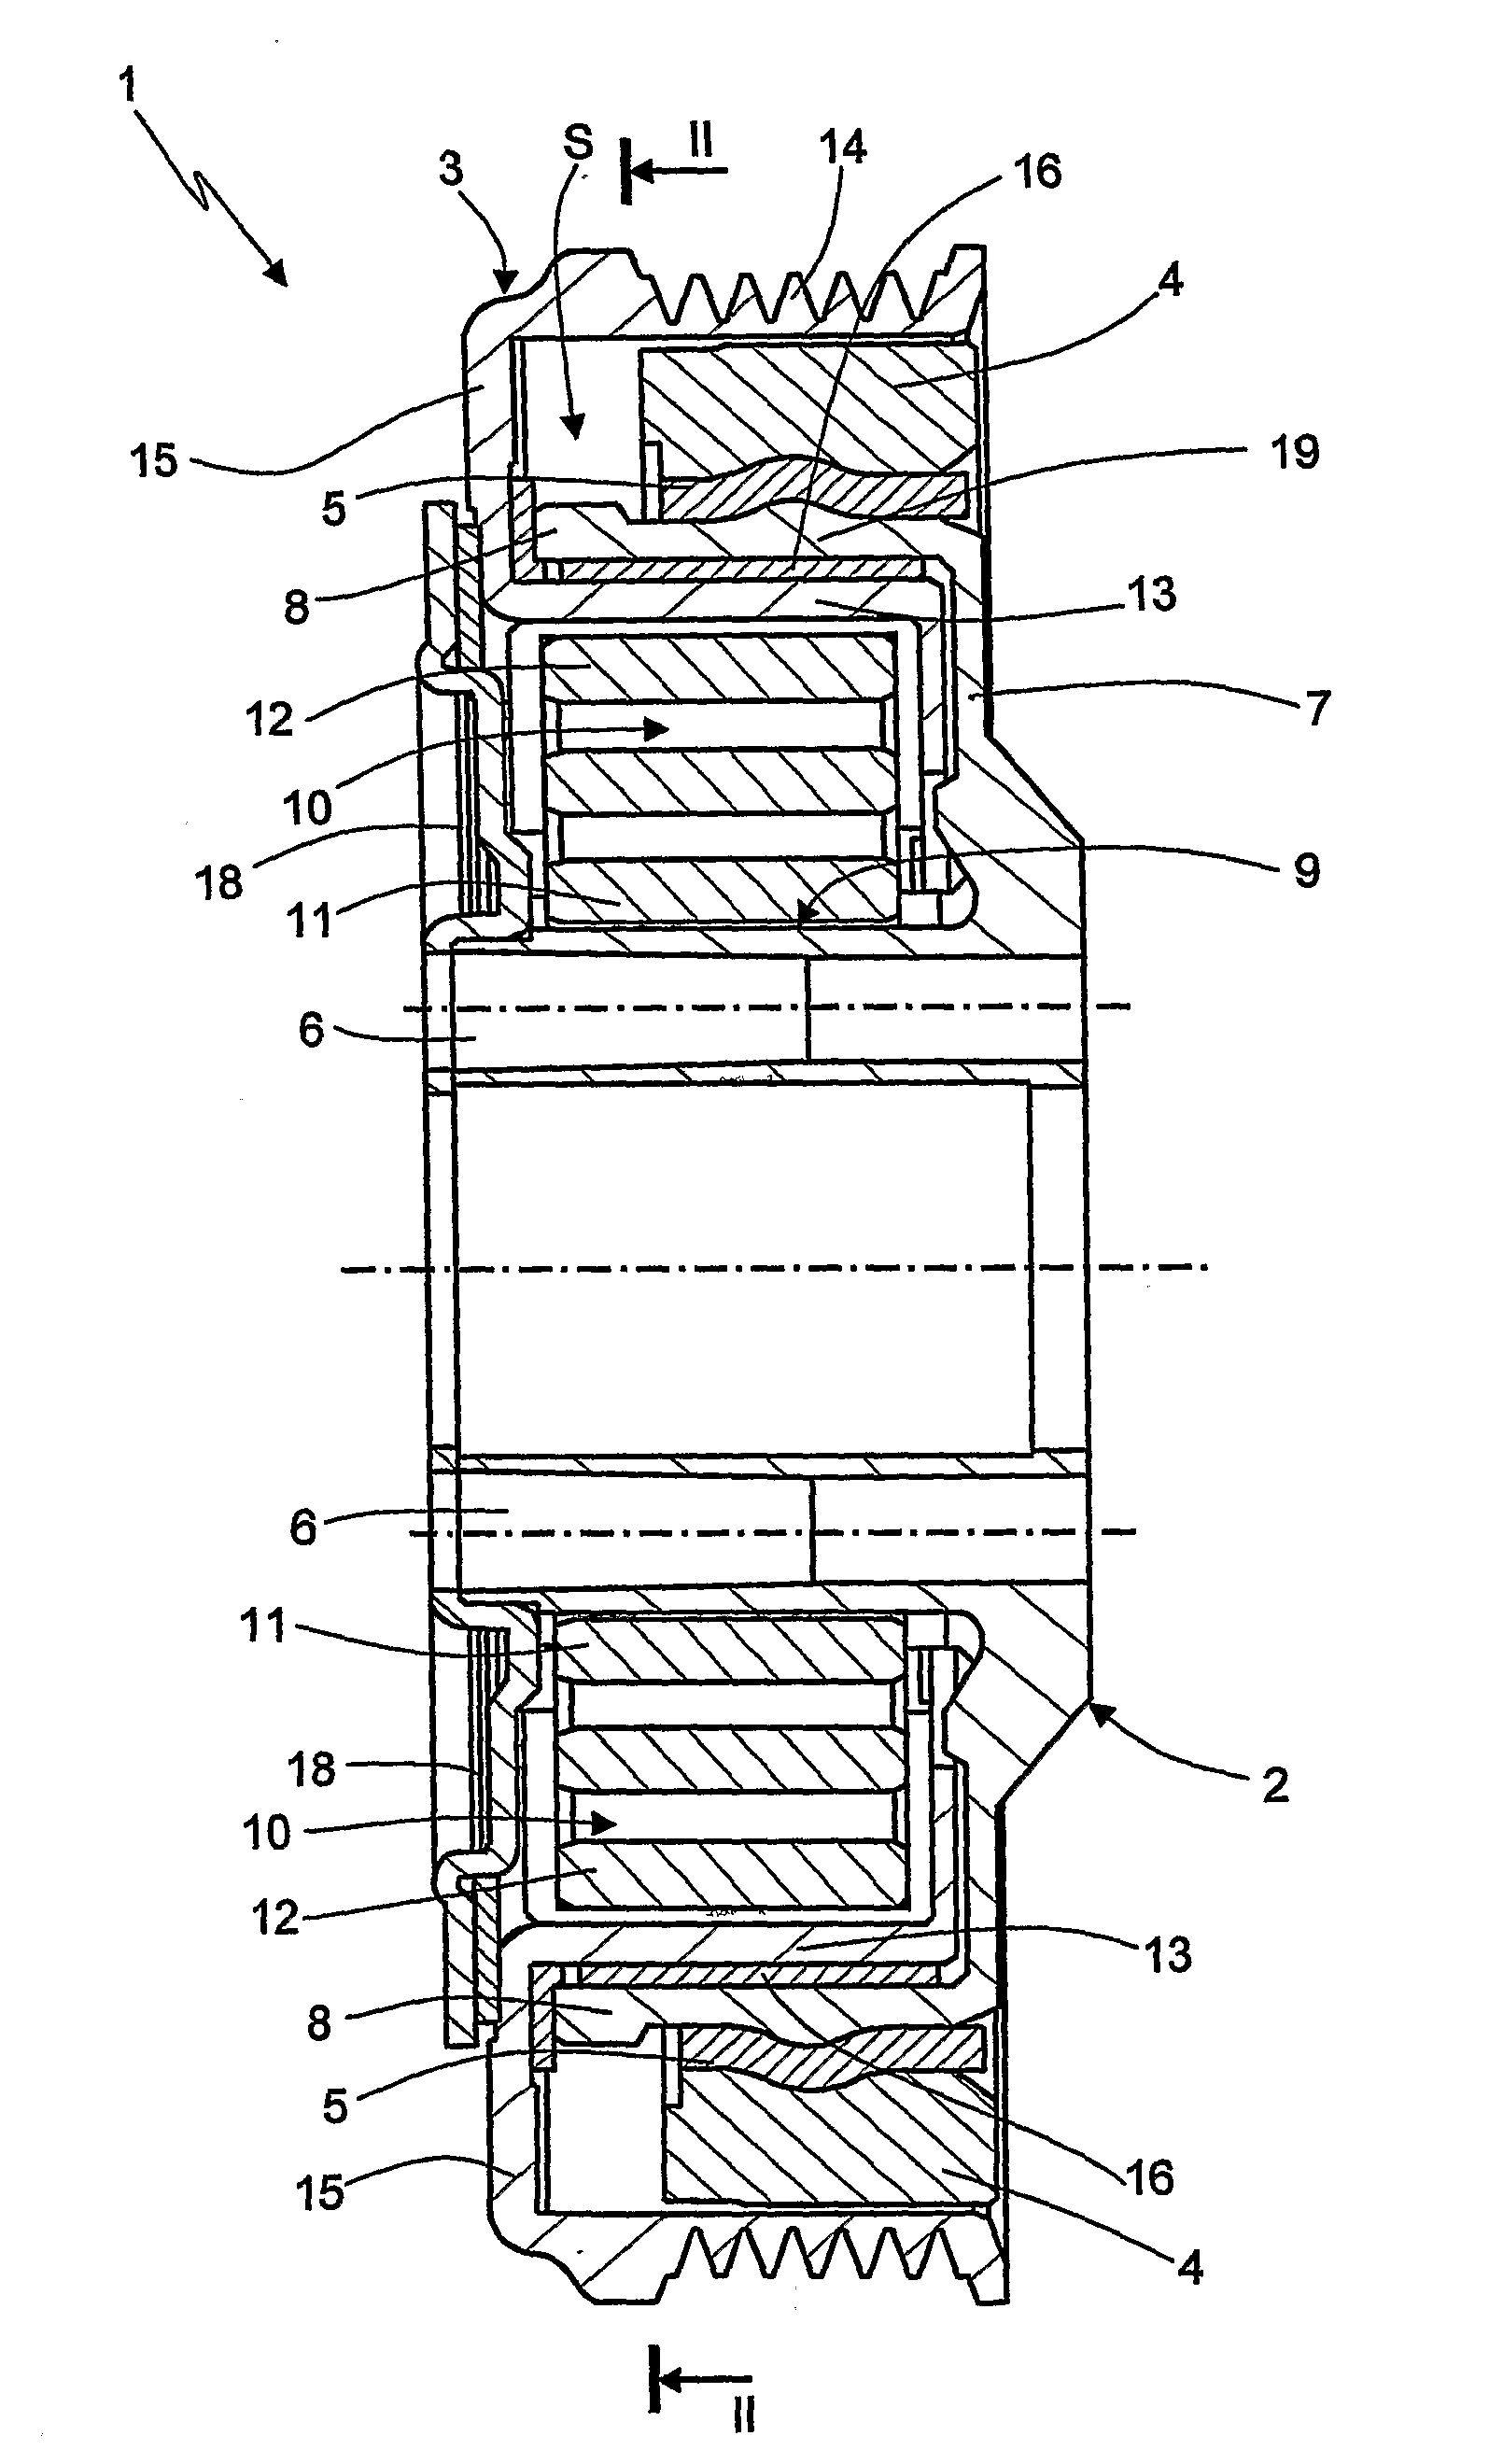 Damper pulley assembly having a safety device